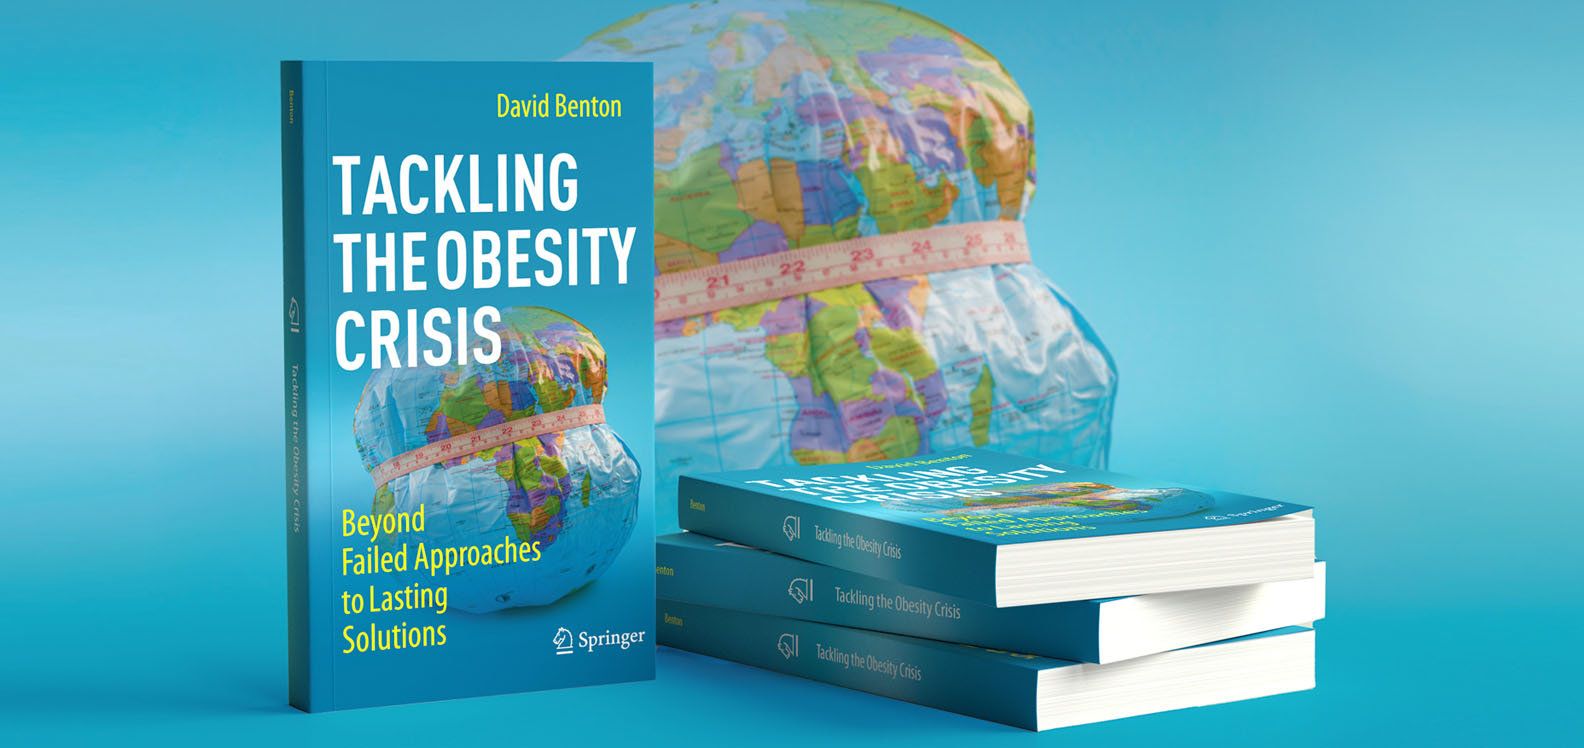 Copies of Professor David Benton's new book, Tackling the Obesity Crisis: Beyond Failed Approaches to Lasting Solutions. In the background is a graphic of an inflatable globe with a measuring tape around it.